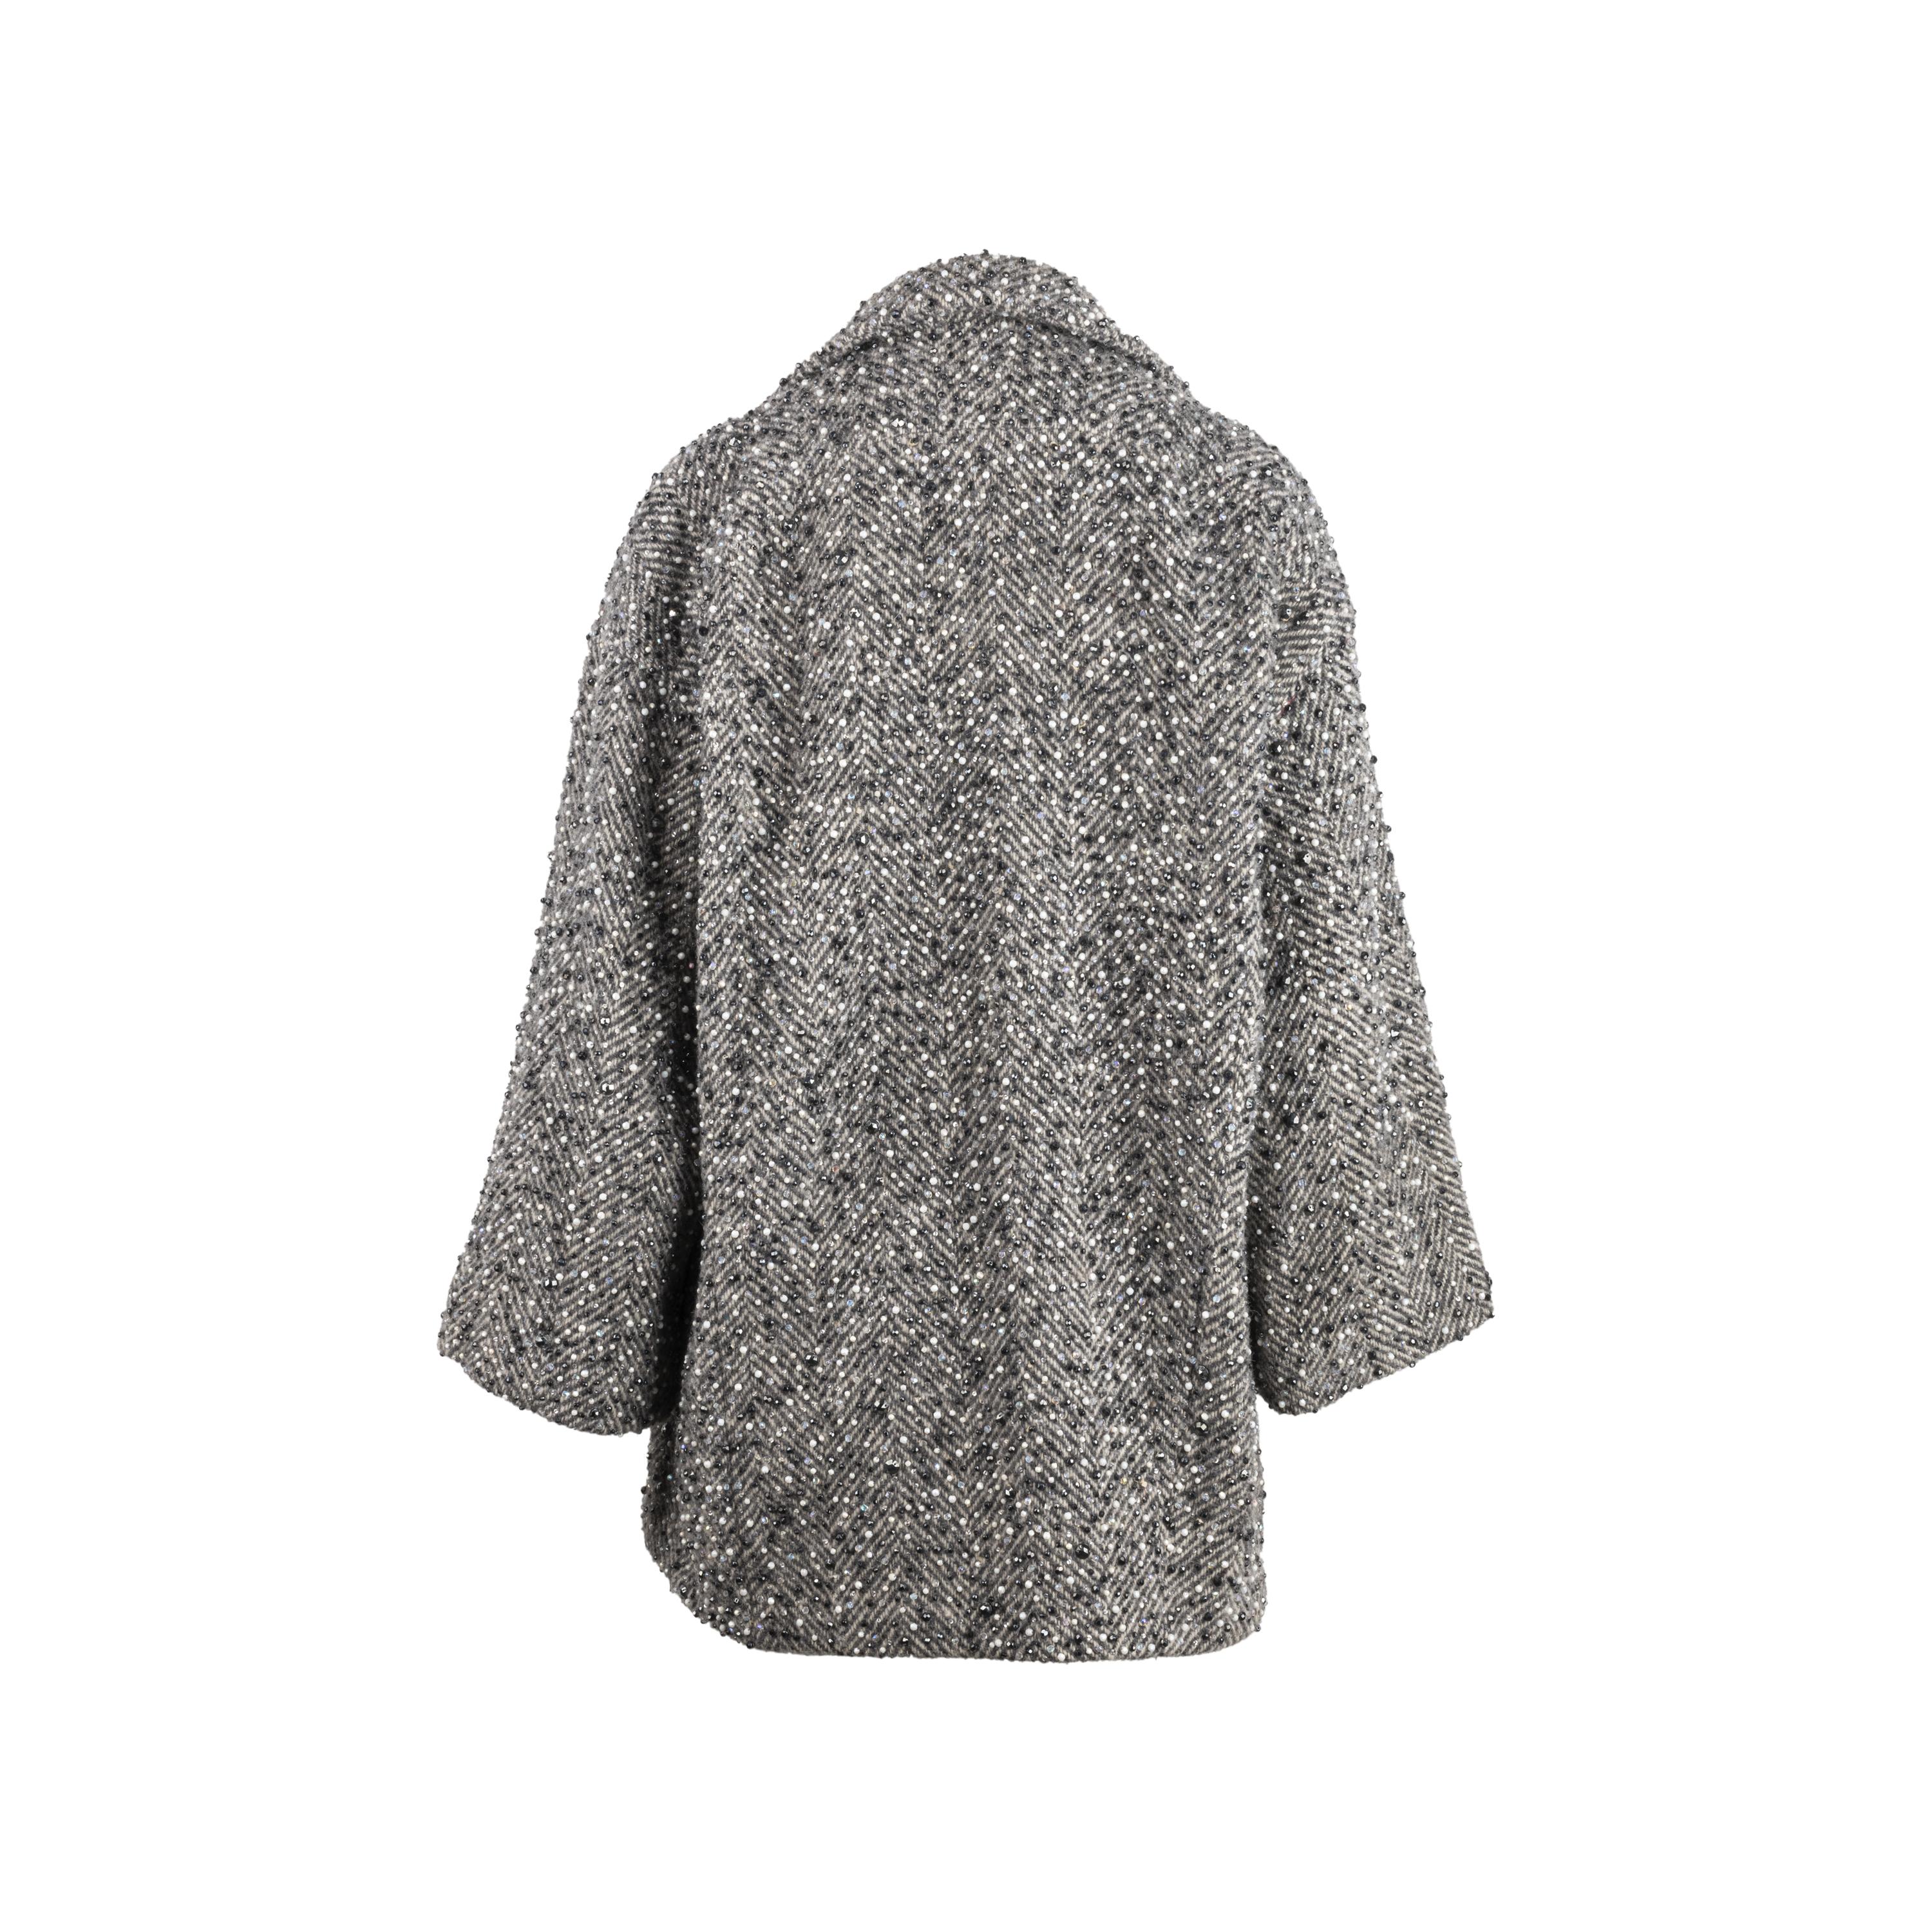 Sparkling coat designed by Gianfranco Ferré in the 80's with full coverage hand embroidery on wool tweed fabric and gray and black herringbone yarns. Embellished with gray, white and anthracite jais and rhinestones, which make this garment